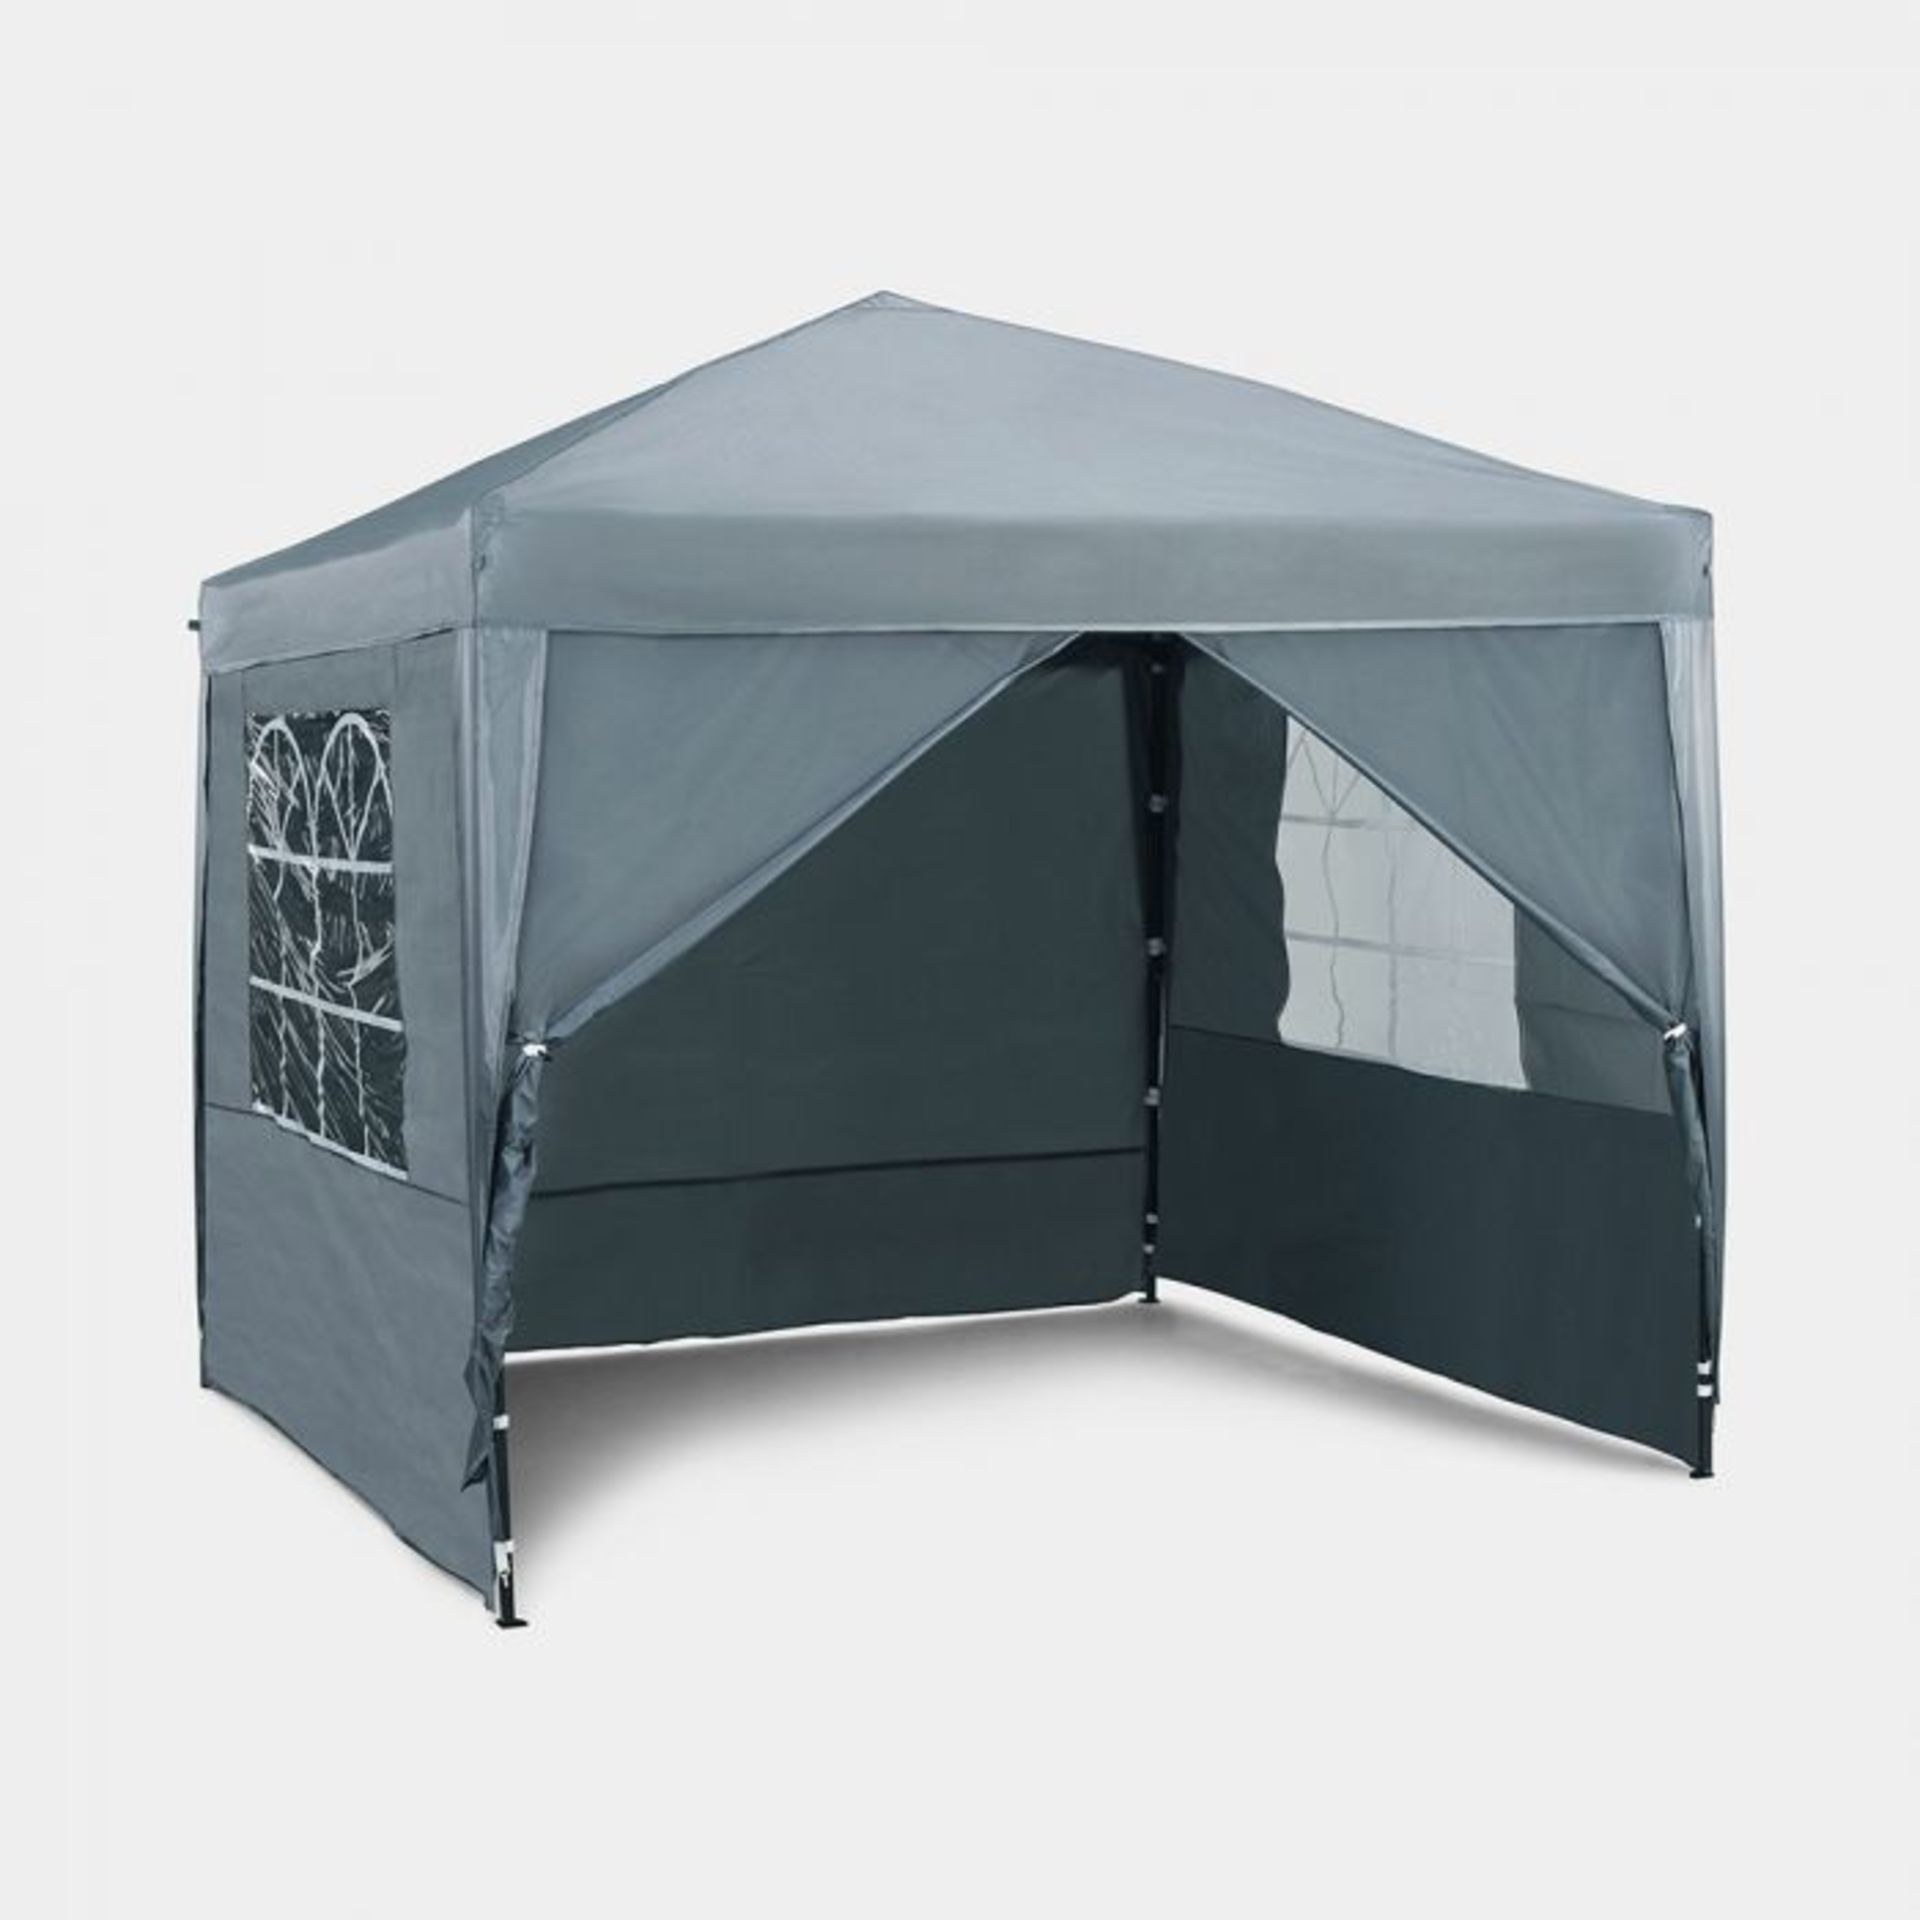 Slate Grey Pop-up Gazebo Set 2.5 x 2.5m. The gazebo offers a great space for entertaining and